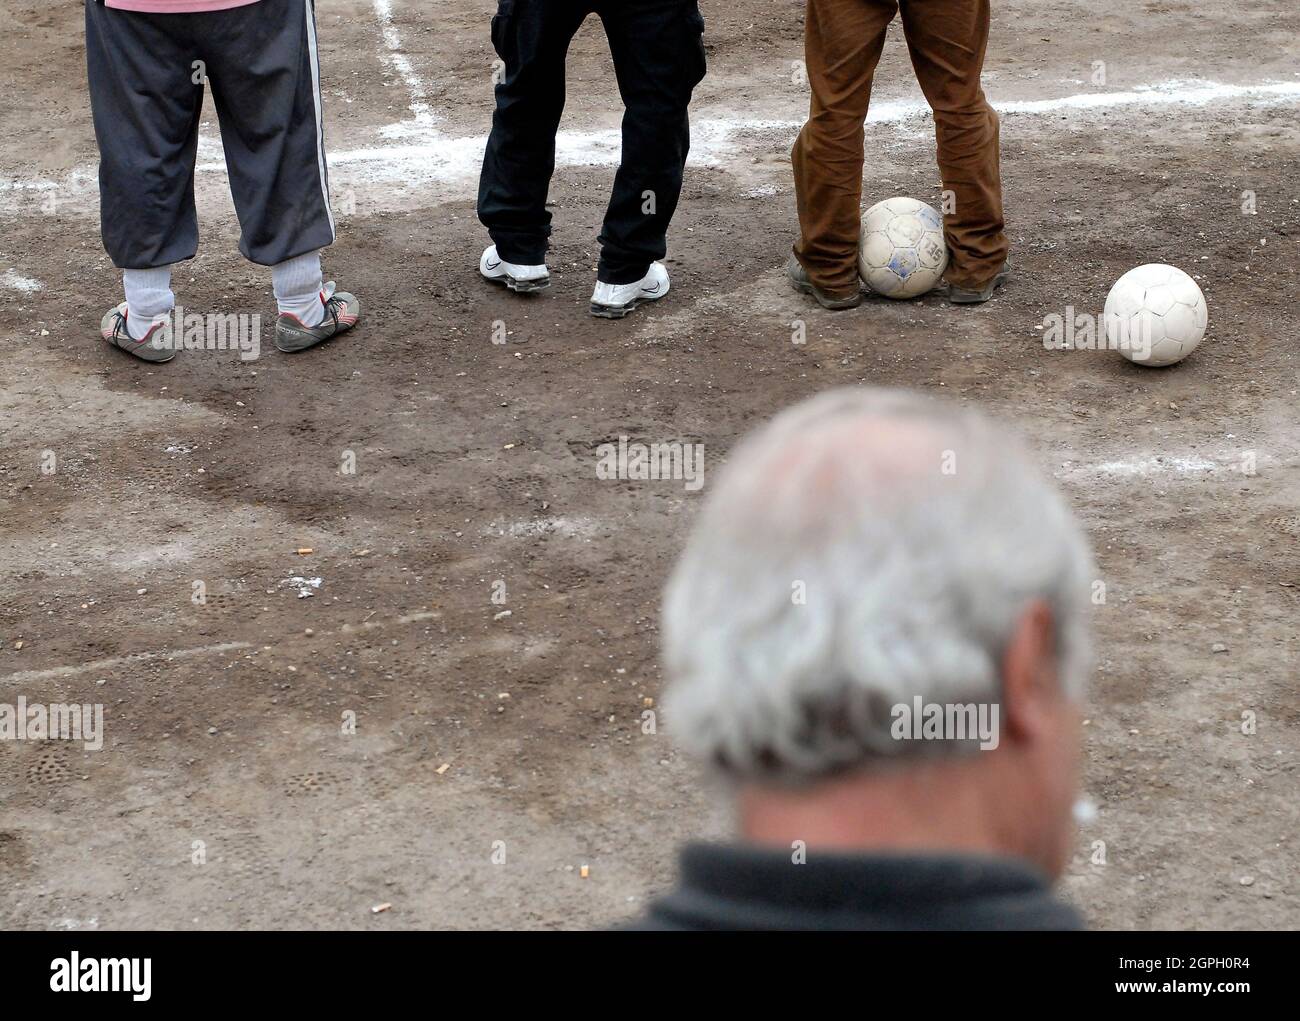 Rome, Italy, 28/03/2009: Quarter-finals of the tournment Palio of Roma for the Inter-nati, the soccer team formed by inmates of penal section of the prison of Rebibbia. © Andrea Sabbadini Stock Photo